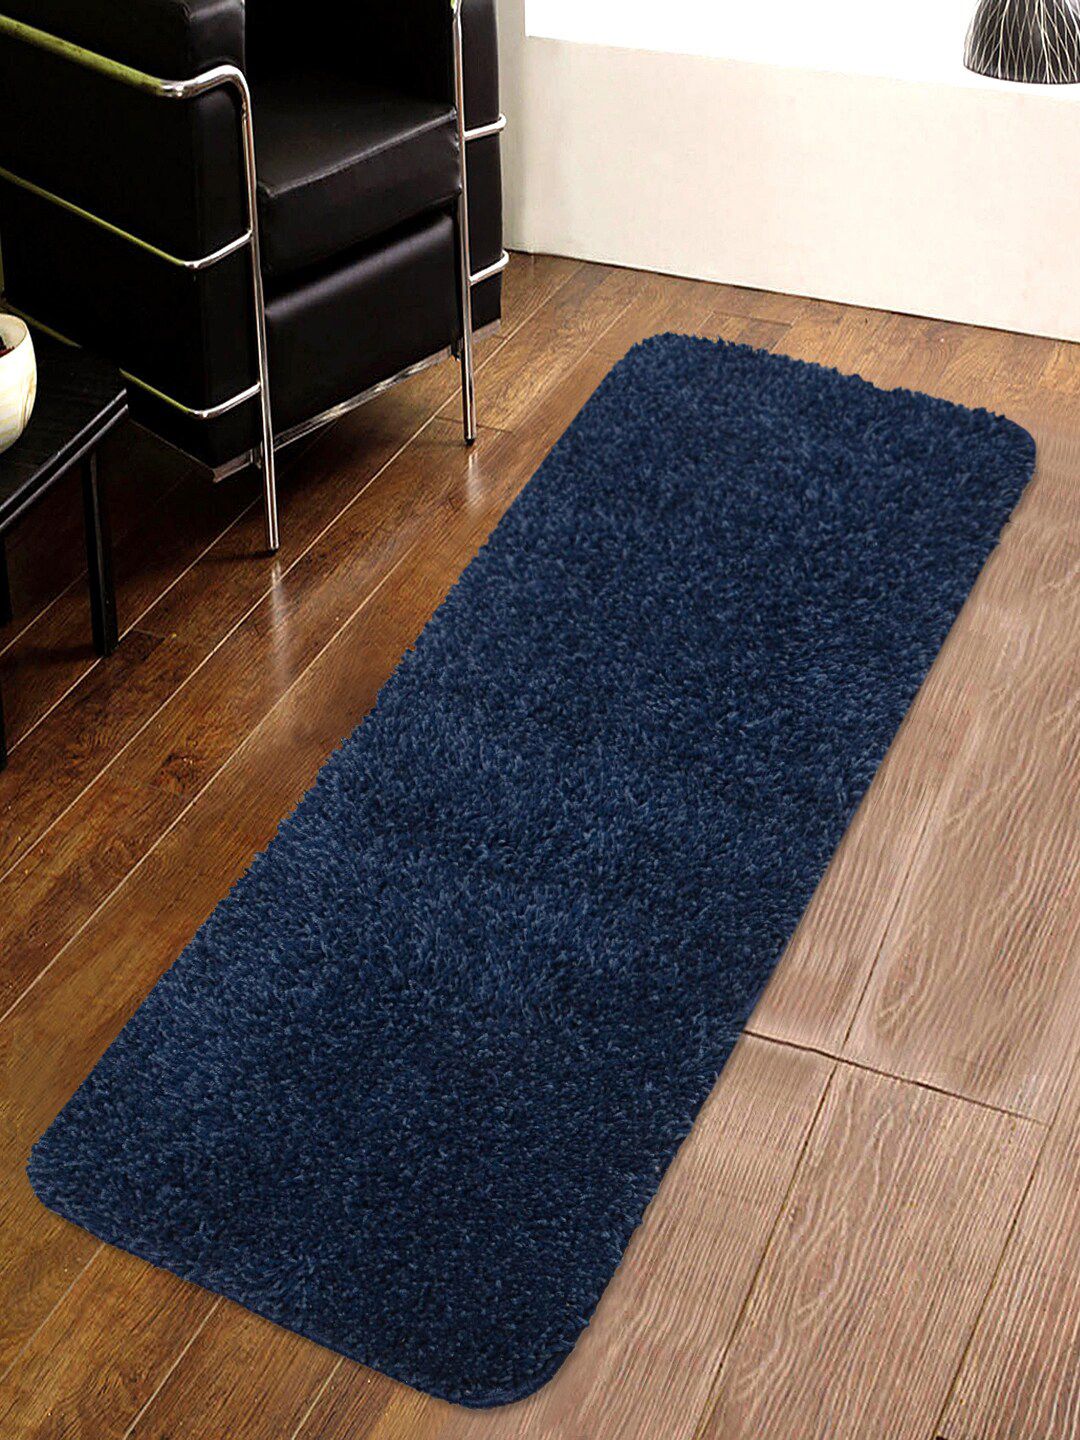 Saral Home Blue Solid Shaggy Floor Runner Price in India